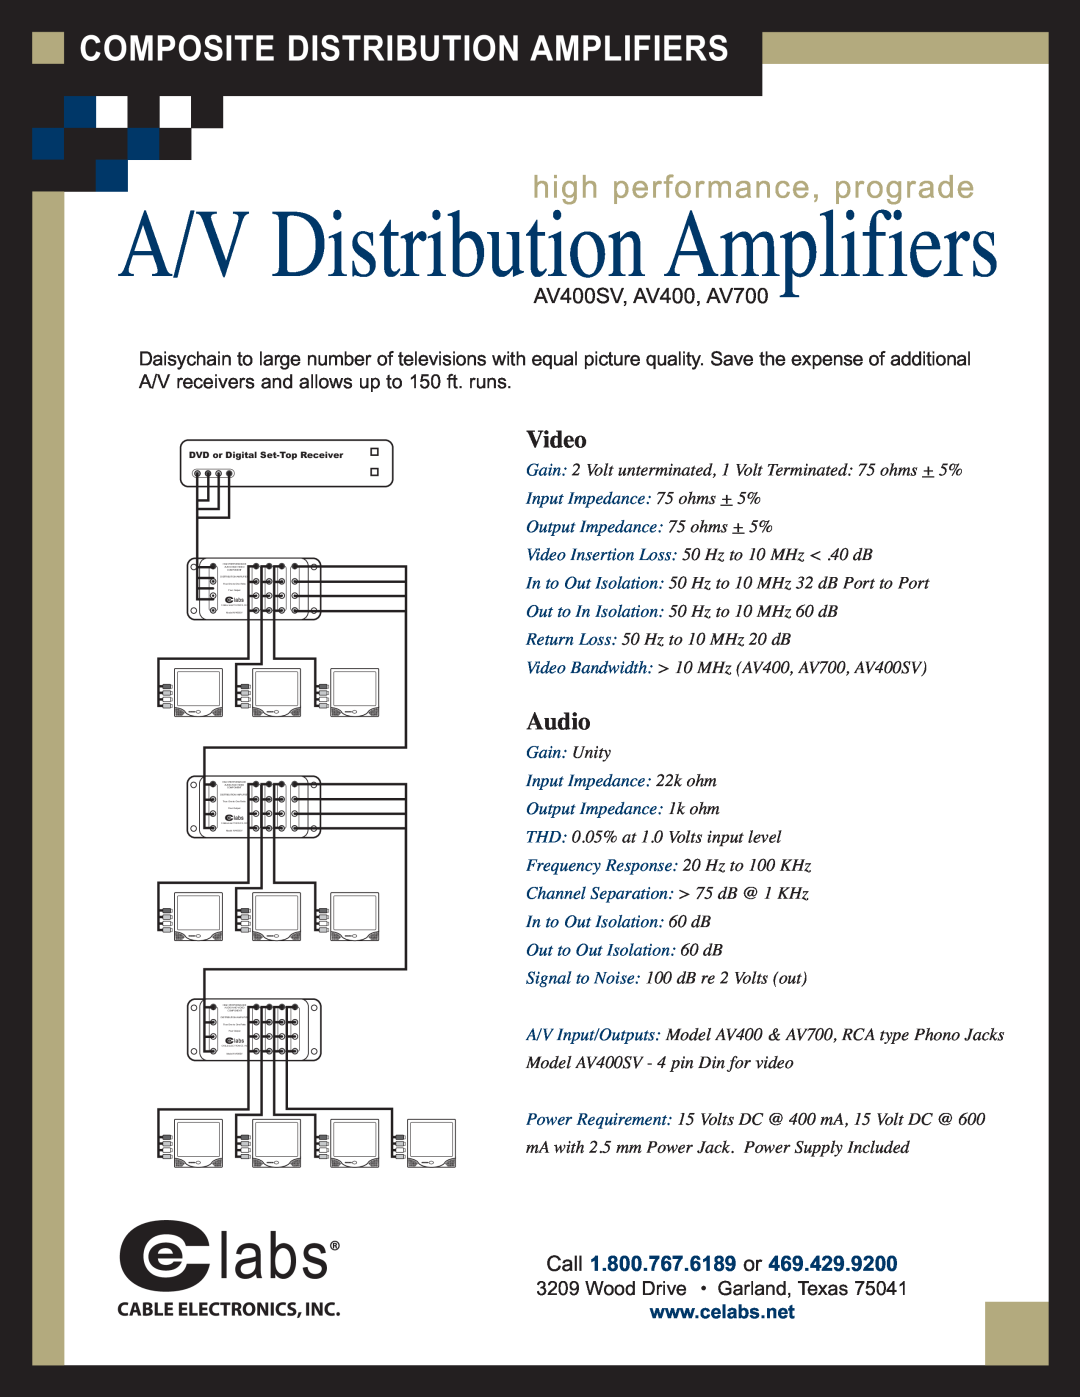 Cable Electronics AV400SV Wood Drive Garland, Texas, A/V Distribution Amplifiers, Composite Distribution Amplifiers, Video 